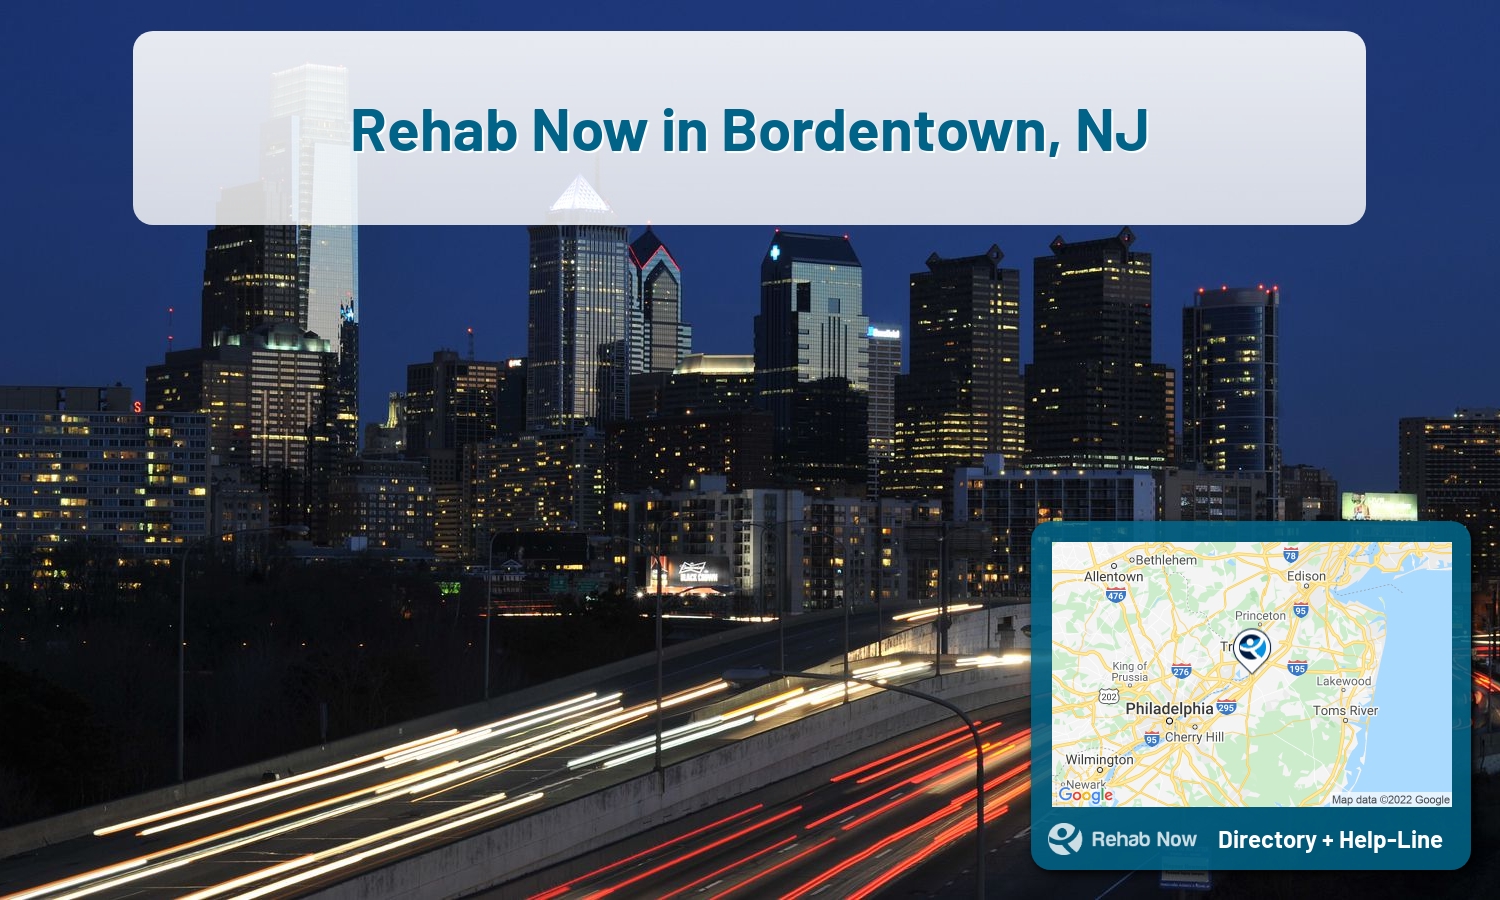 View options, availability, treatment methods, and more, for drug rehab and alcohol treatment in Bordentown, New Jersey